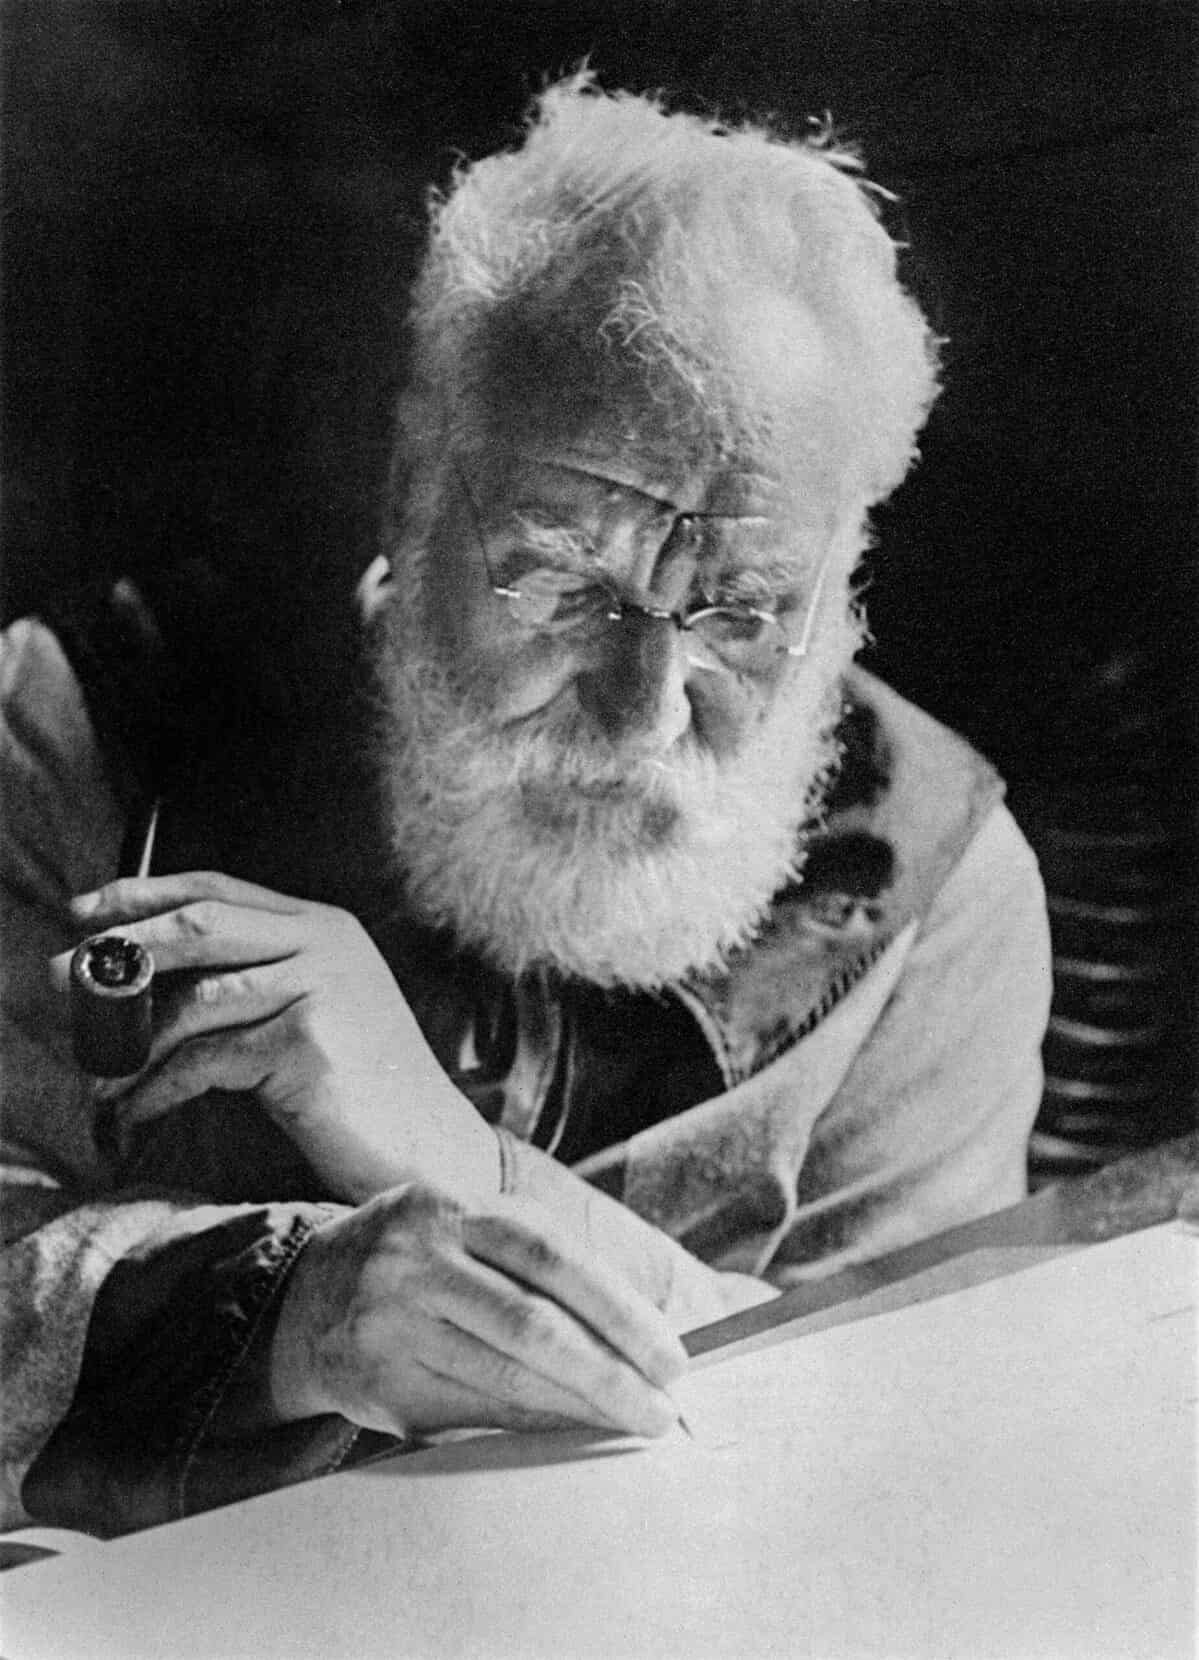 A black-and-white photograph of Alexander Graham Bell circa 1913. He is seated at his desk, which takes up the bottom and lower right frame. His gaze is focused looking down on the paper on which he writes with a pen in his right hand. In his left hand he is holding a pipe. His hair and his beard are gray and he is wearing wire-frame spectacles. He is quite wrinkled. indistinct black background.